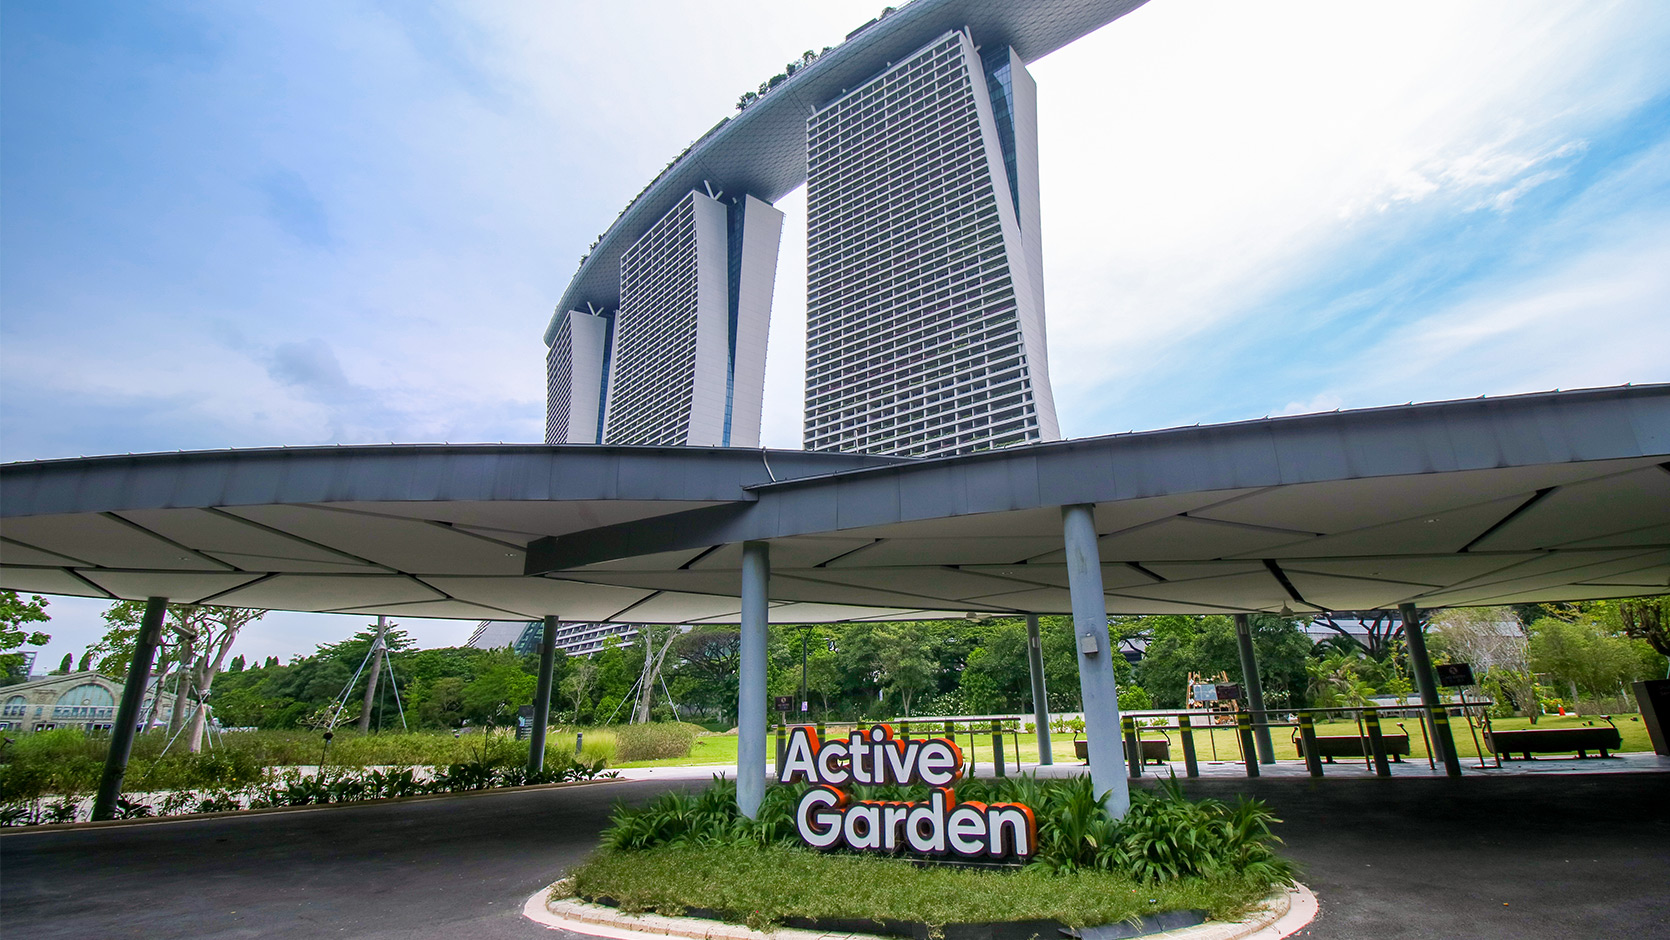 Located at Active Garden